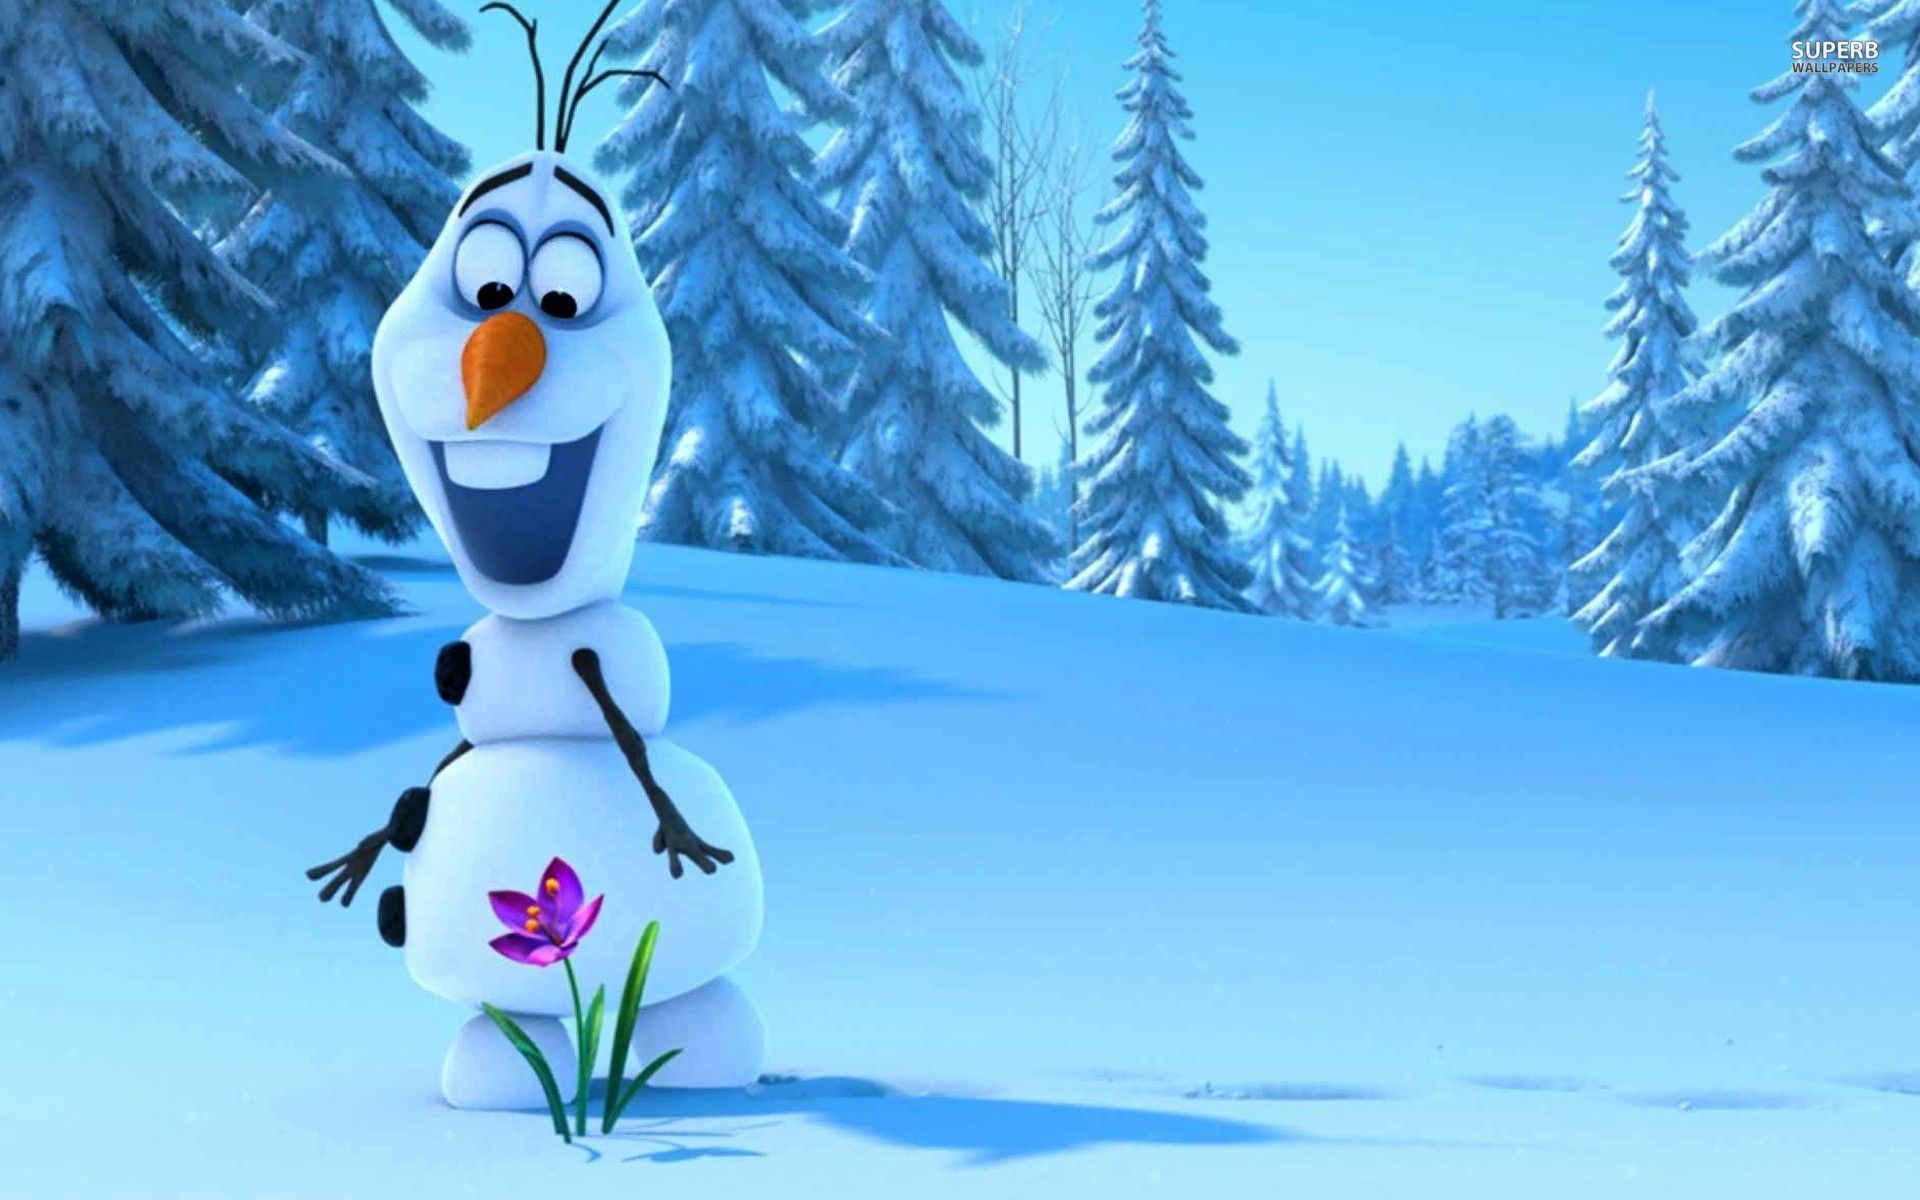 Olaf from Frozen in the snow with a flower wallpaper - Olaf